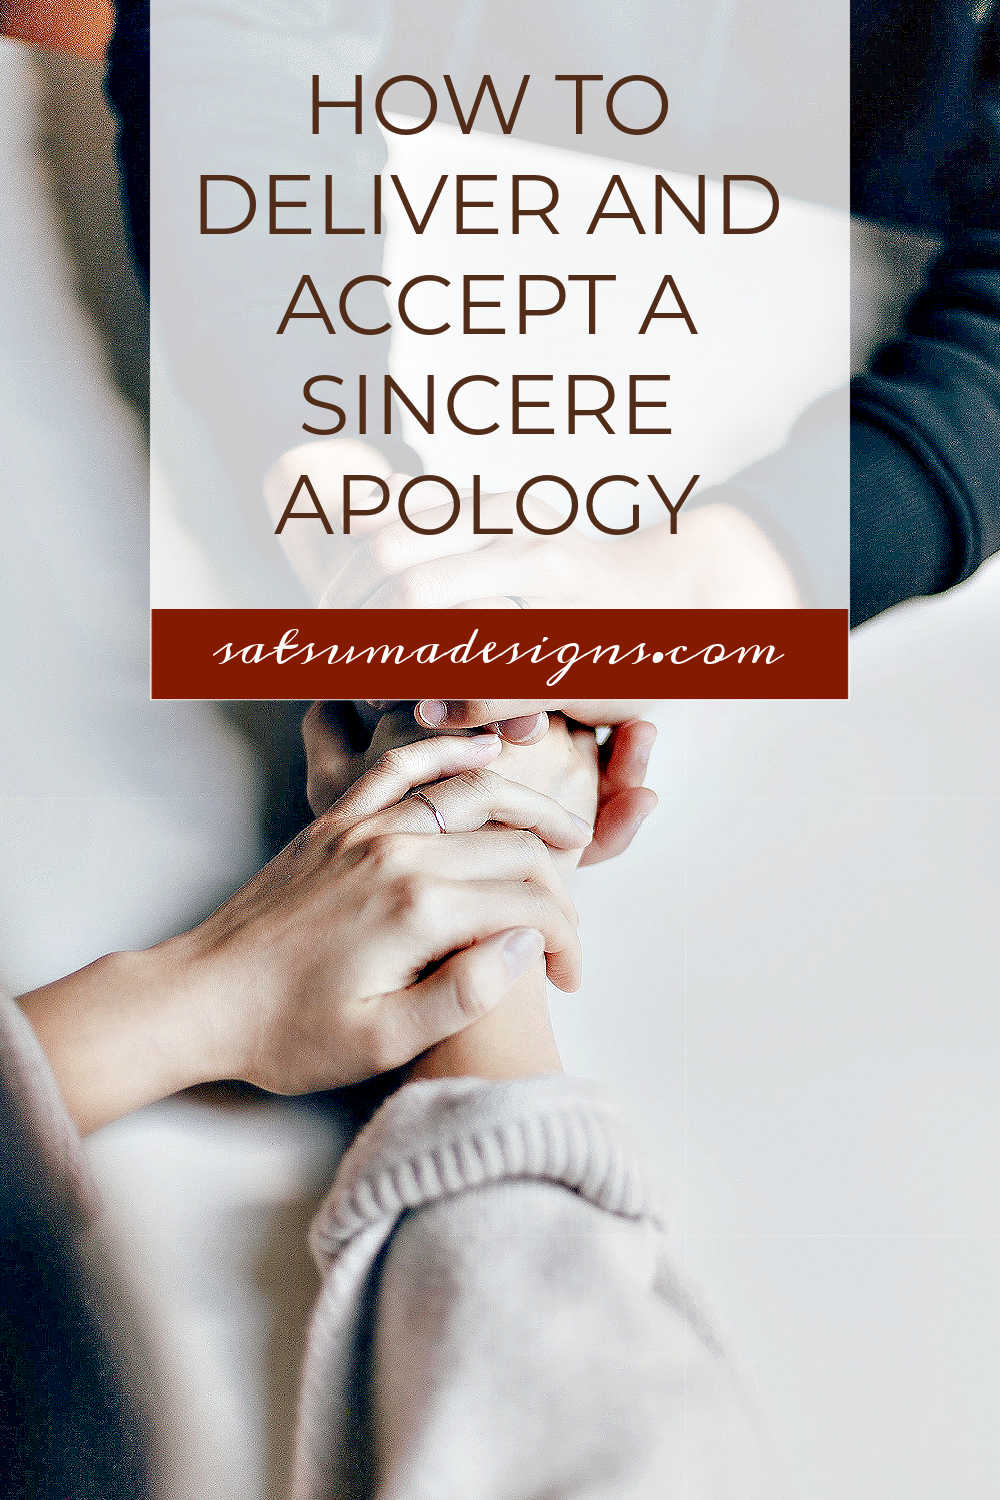 How to deliver and accept a sincere apology. Sadly, relationship struggles are a part of life, but we don't have to hold onto the pain when we can accept a sincere and thoughtful apology. Discover how to make an apology that will begin to heal relationships. #relationships #etiquette #businessskills #lifeskills #partnership